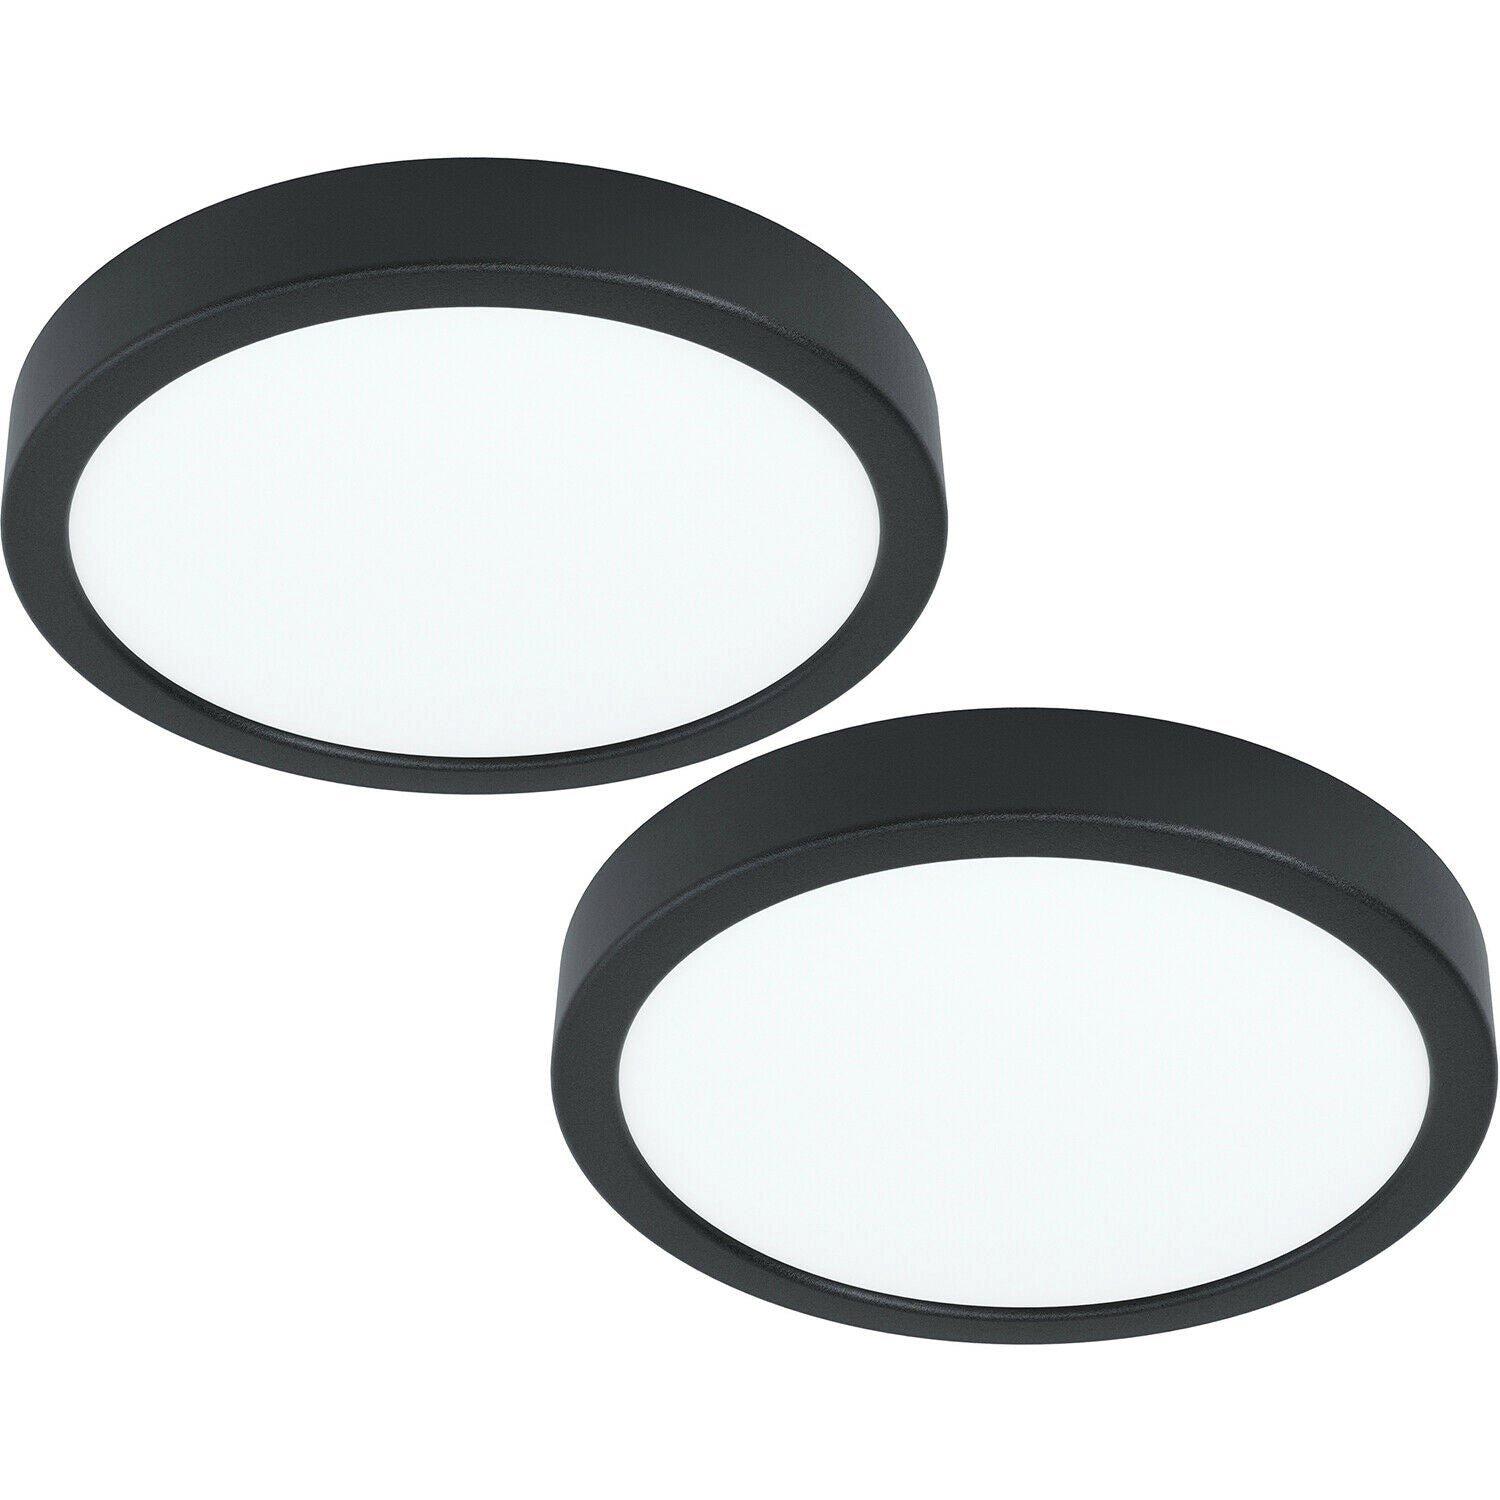 2 PACK Wall / Ceiling Light Black 210mm Round Surface Mounted 16.5W LED 3000K